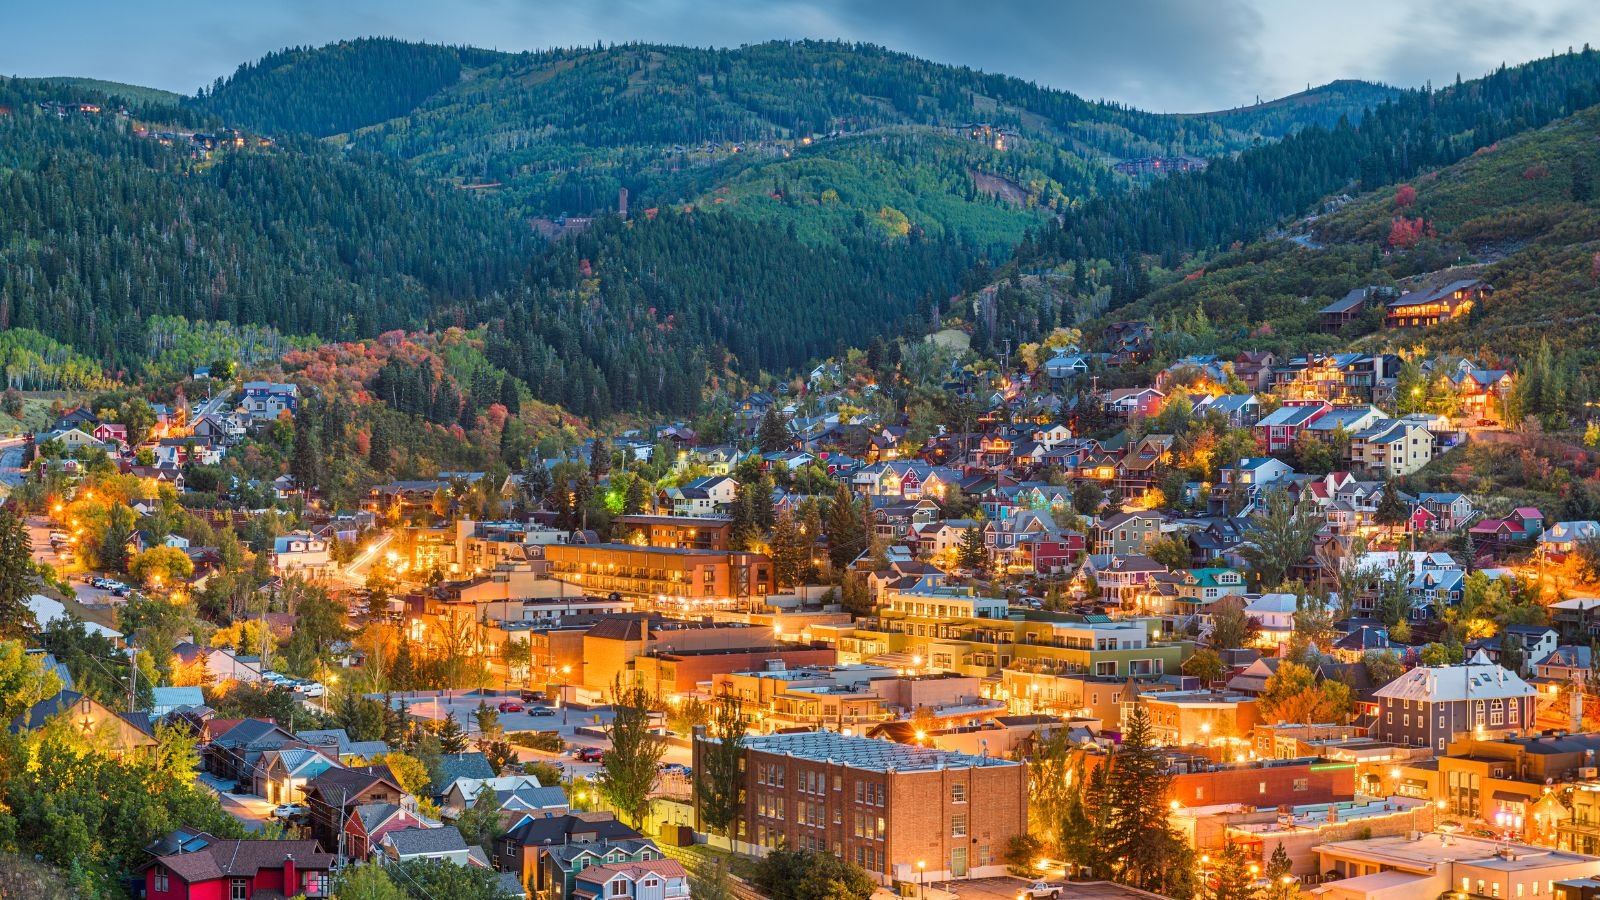 <p>Park City is the host of the Sundance Film Festival. ome for its lively arts scene and gourmet food against a relaxed mountain setting. Easy access to Salt Lake City’s airport and mild, dry climate add to its appeal. Scenic gondola rides take you through mountain trails with refreshing views.</p>